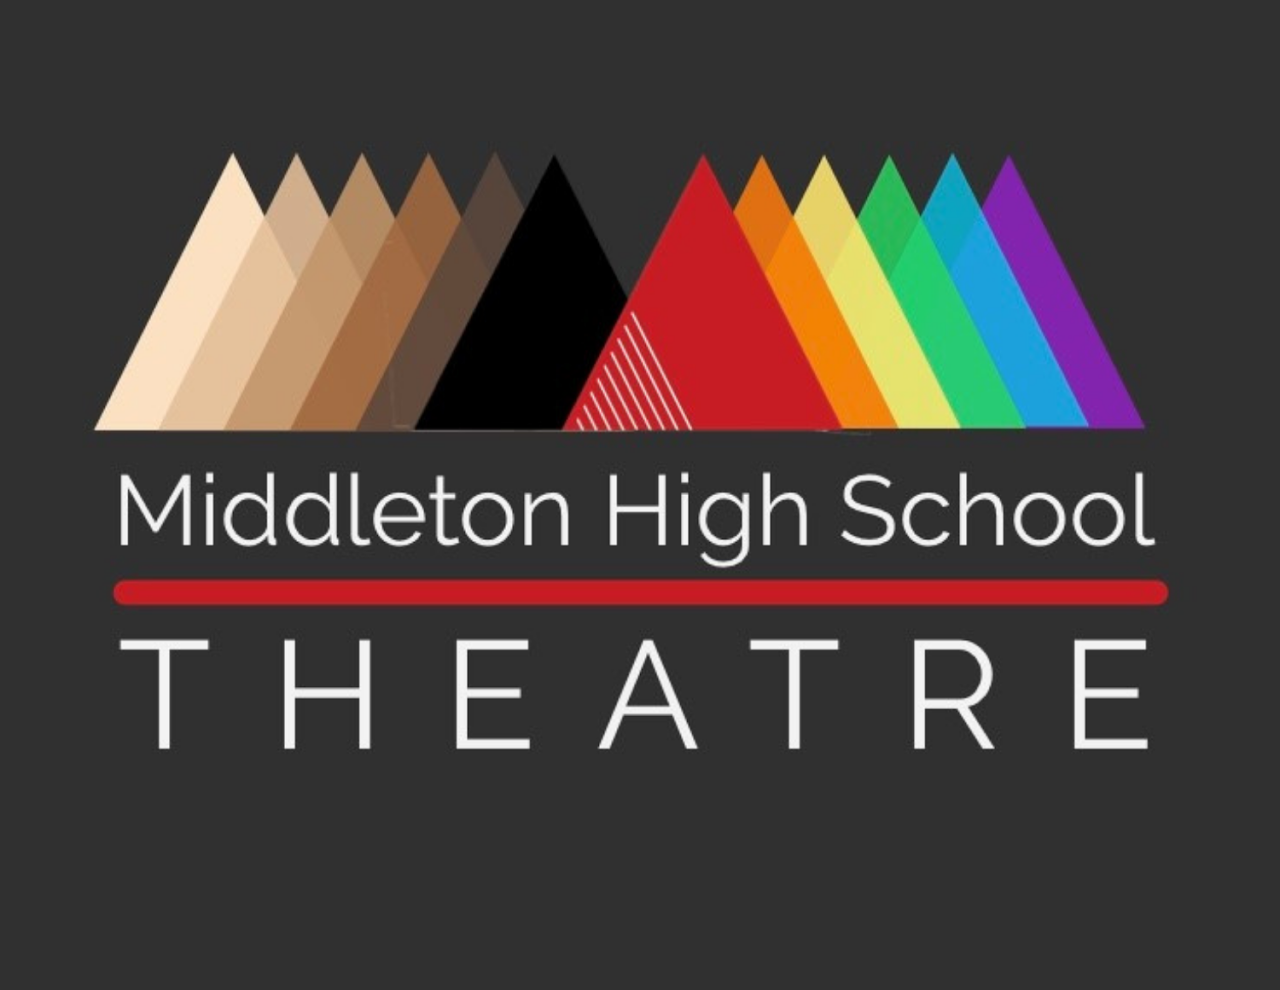 Middleton High School Theatre graphic with cascade of triangles ranging in color from tan, brown, black, red, orange, green & purple